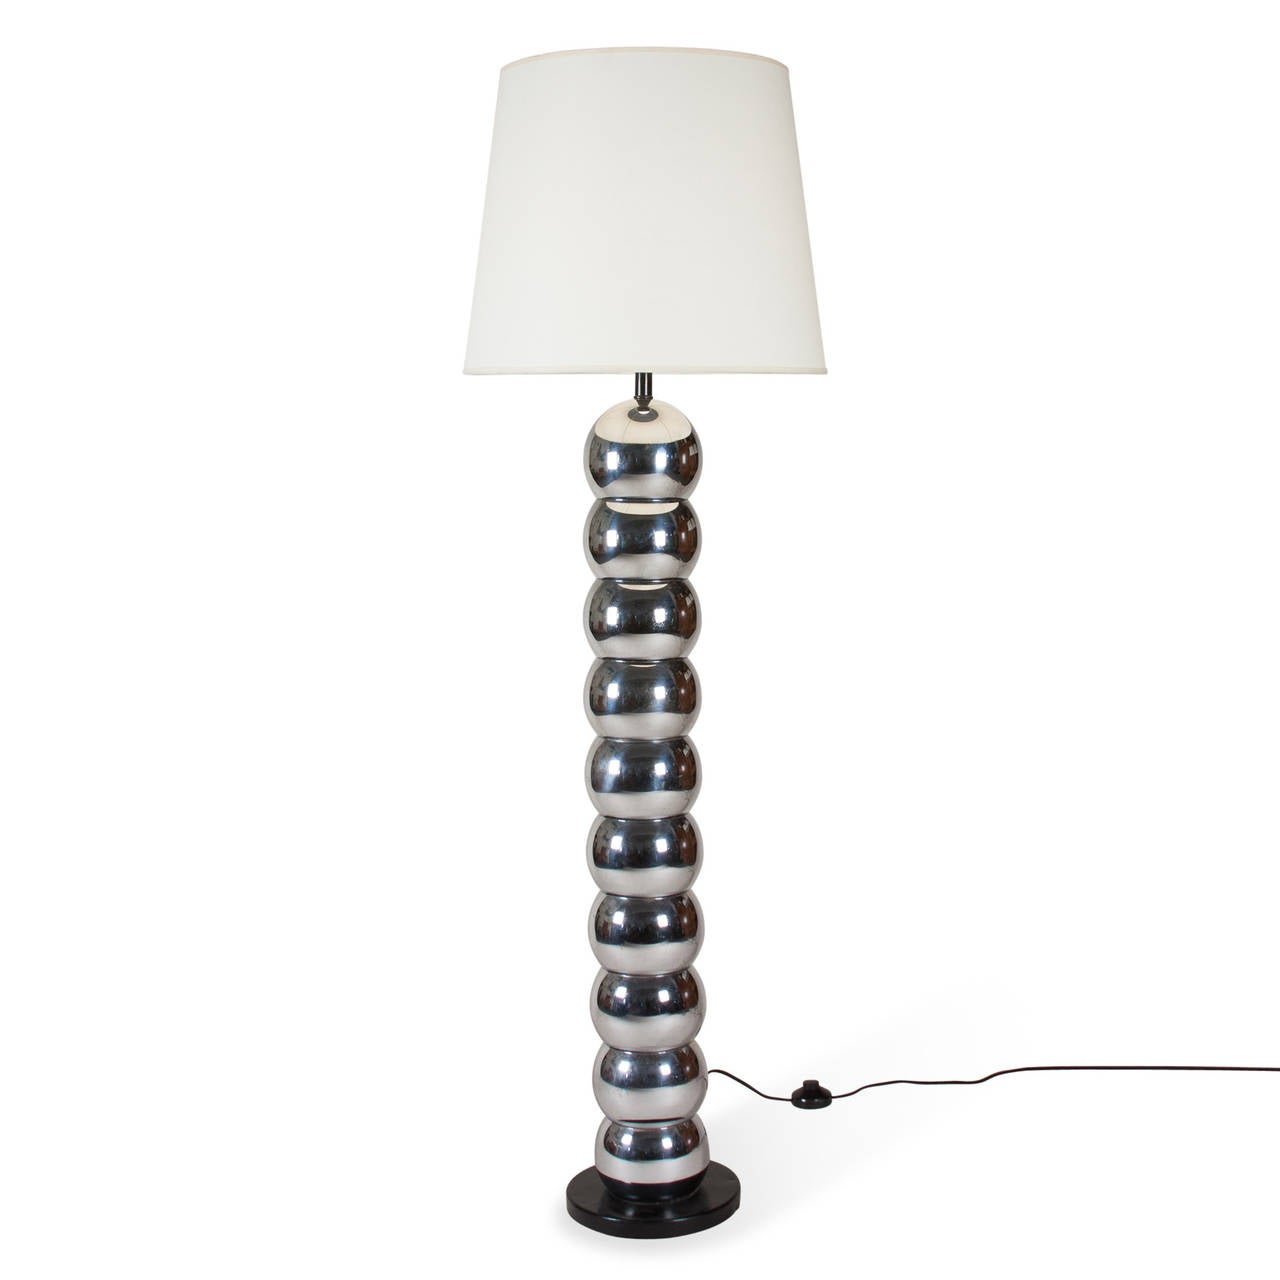 Stacked chrome ball floor lamp, with circular black base, American, 1960s. In custom black paper shade. Overall height 57 in, base has 9 in diameter, ball have 6 in diameter. Shade measures top diameter 16 in, bottom diameter 20 in, height 13 1/2 in.